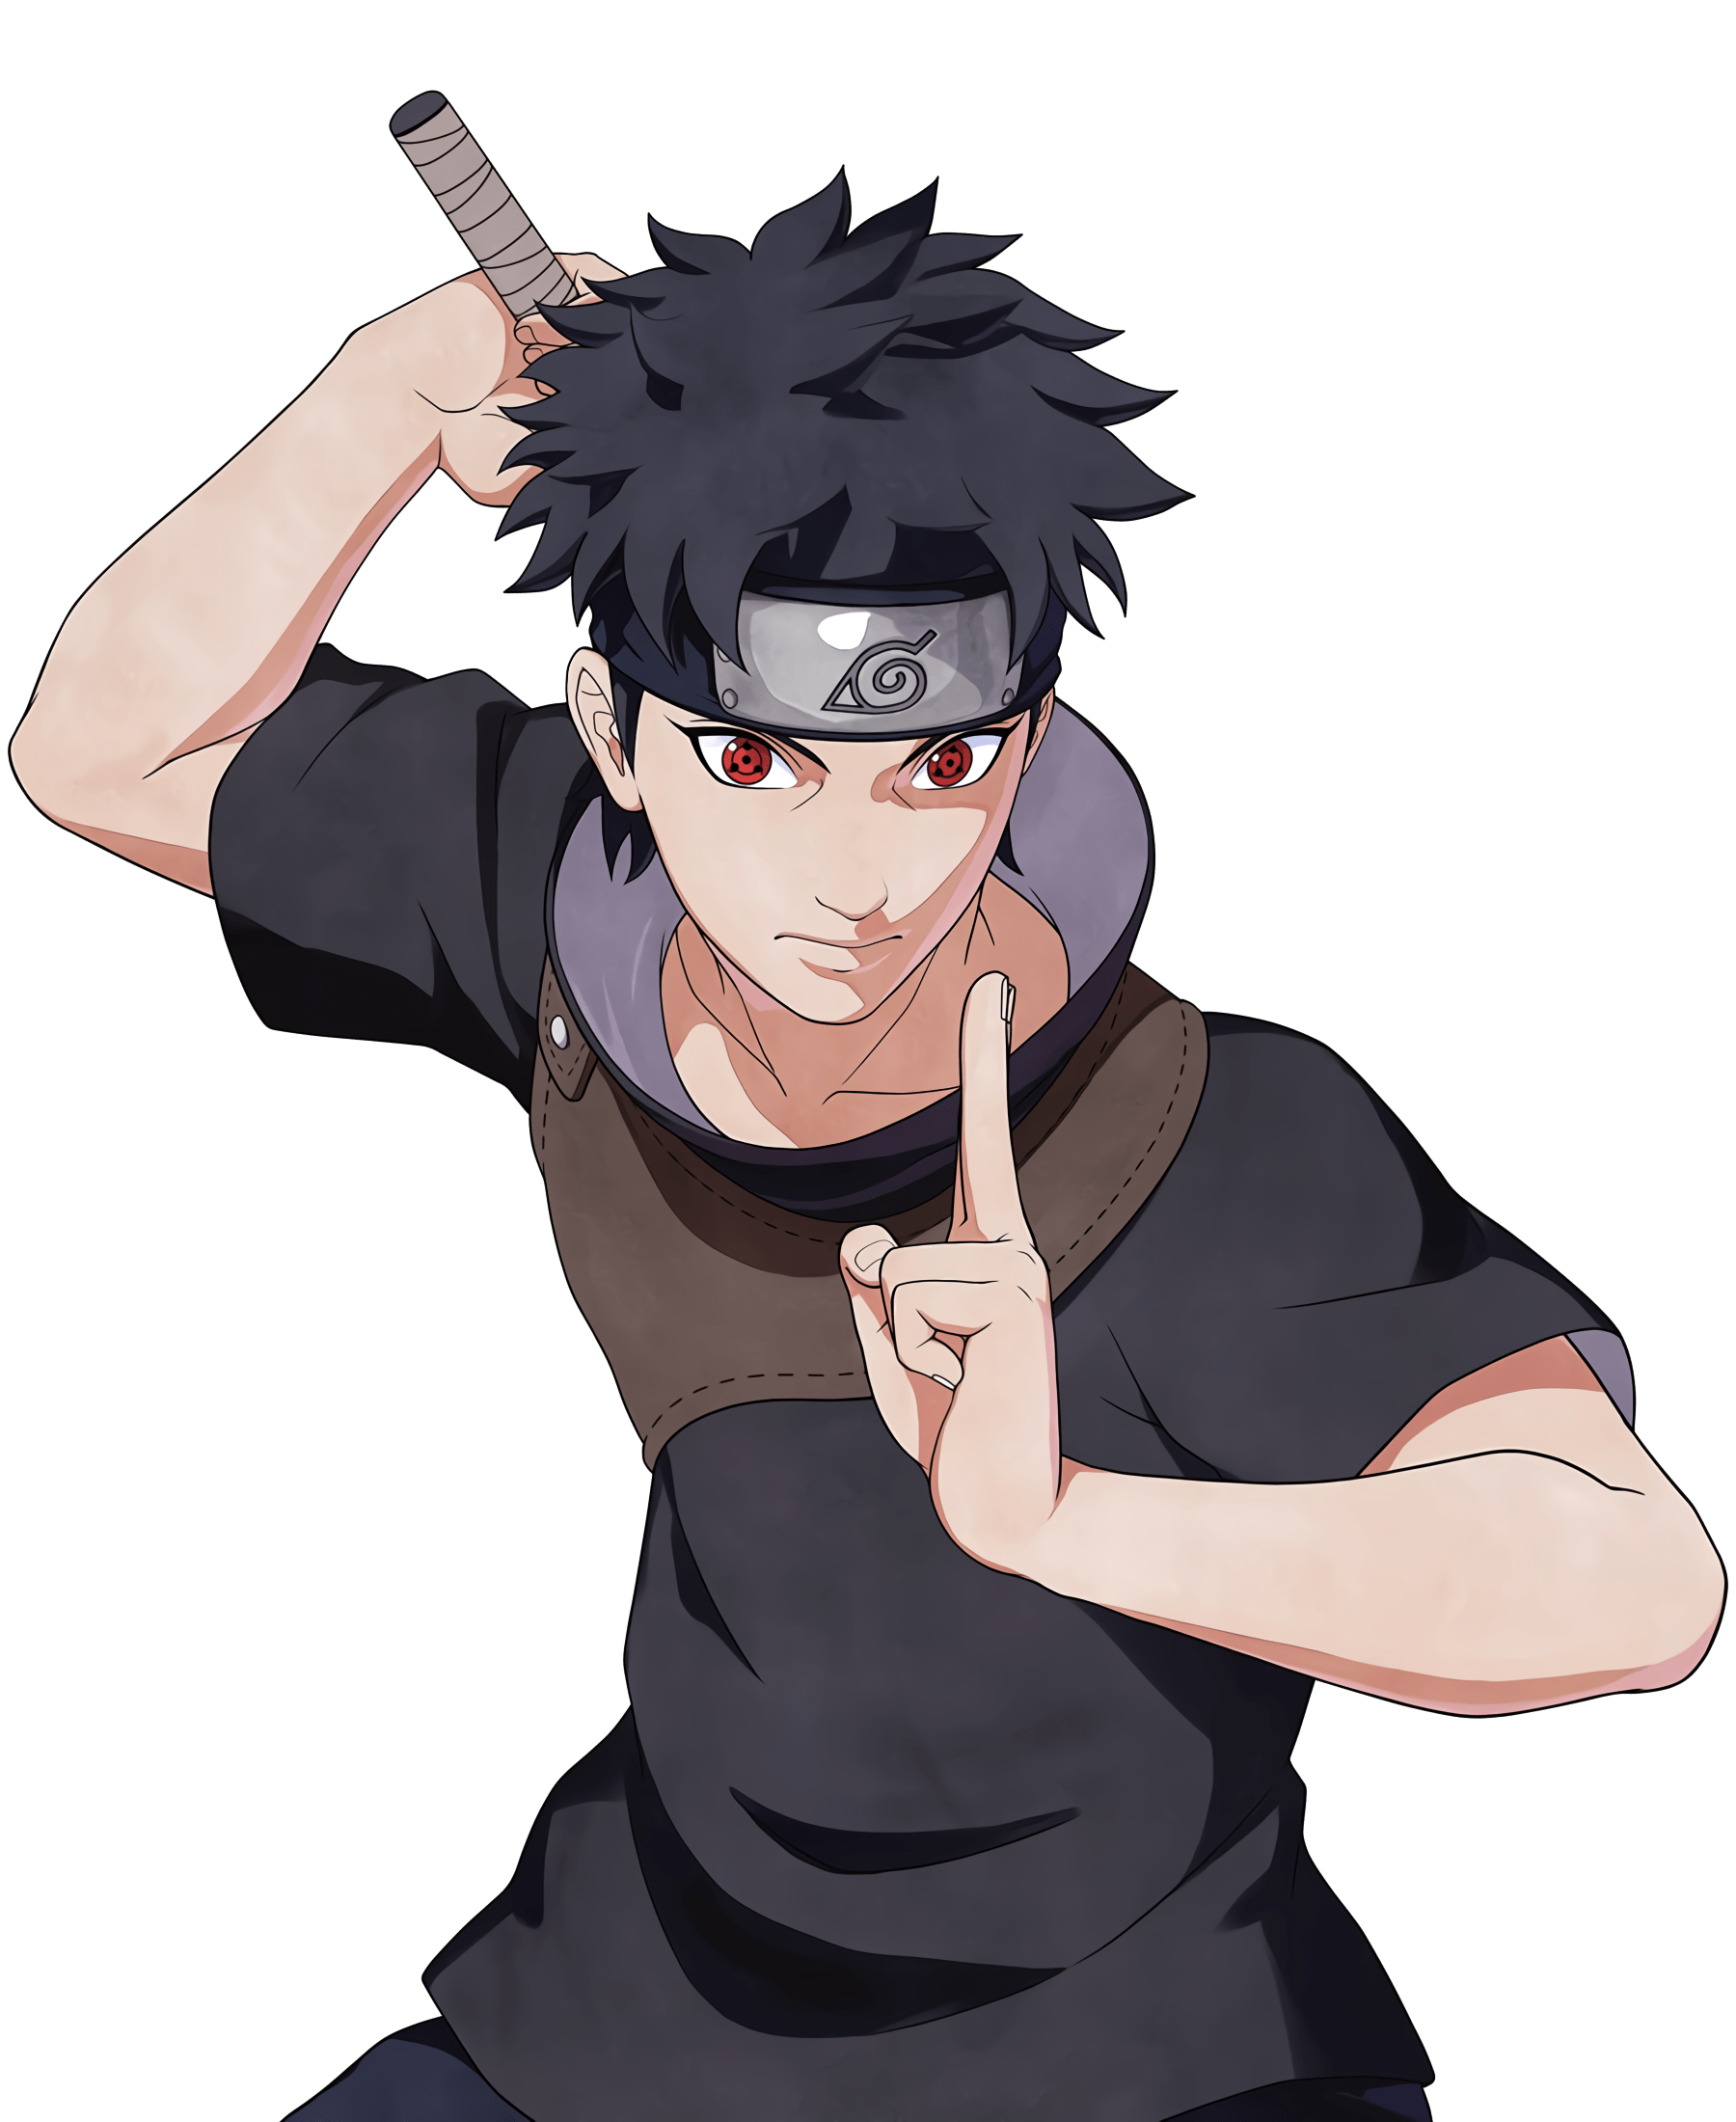 Shisui png images